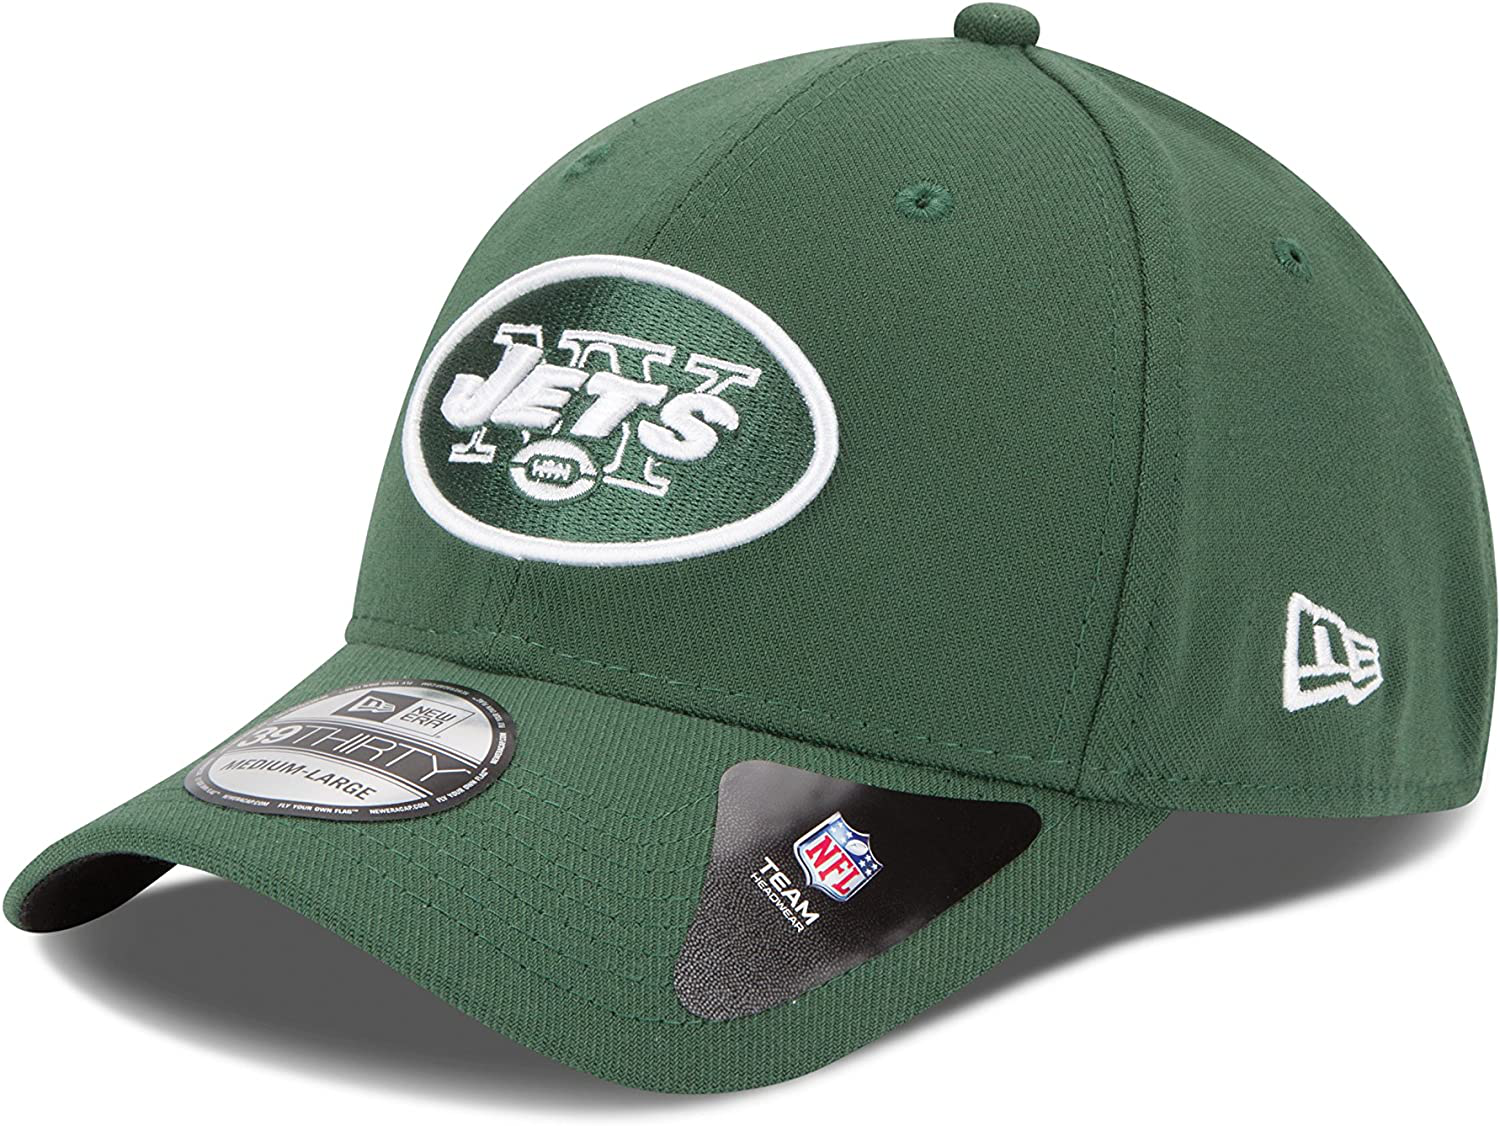 New Era 39Thirty NFL New York Jets Team Classic Green Flex Fitted Hat